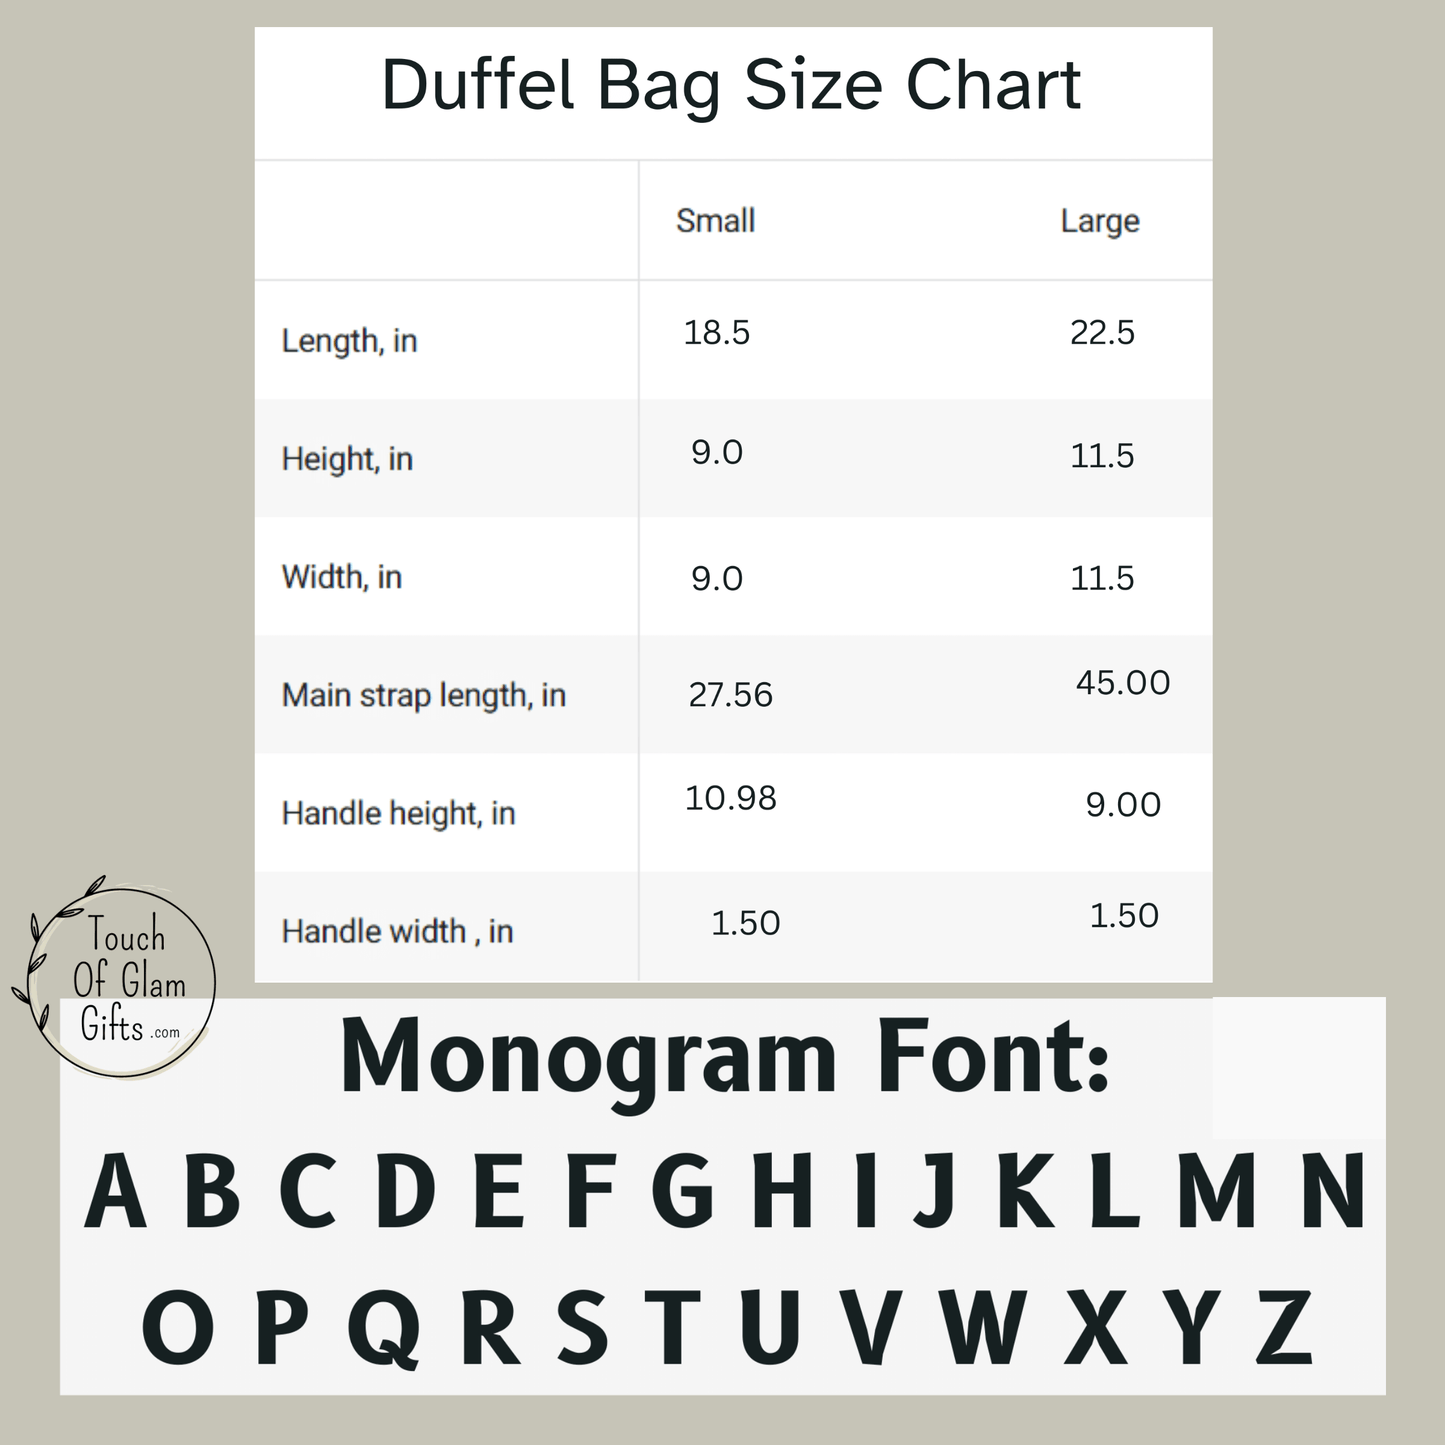 Our size chart with all dimensions for the large and small mens duffel bags. This also shows the font used for letters for personalization for the mens weekend bag.